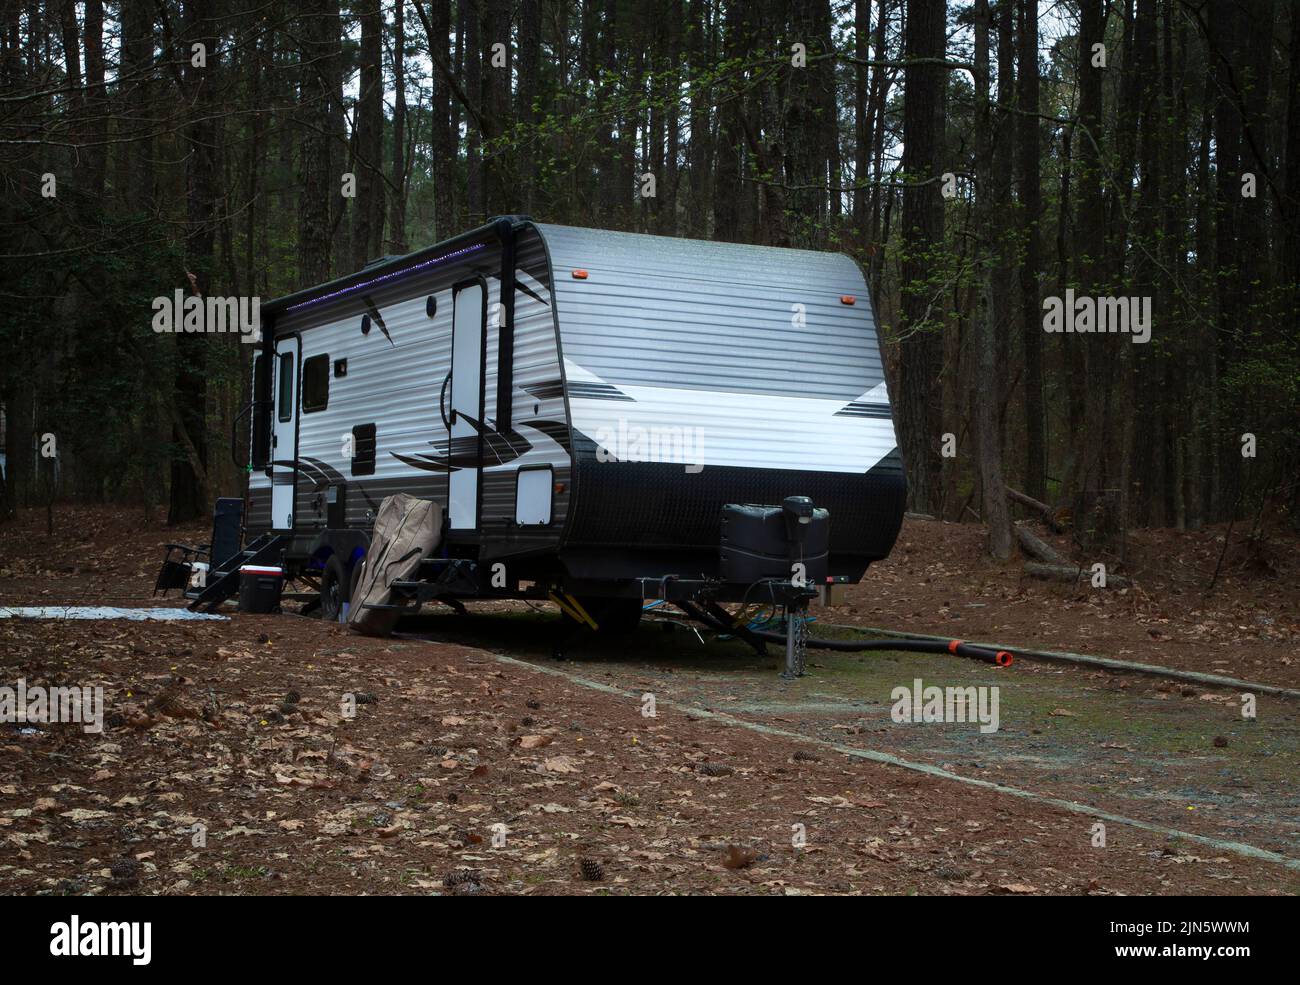 Camping trailer that is whte with black and gray at Jordan Lake in North Carolina Stock Photo